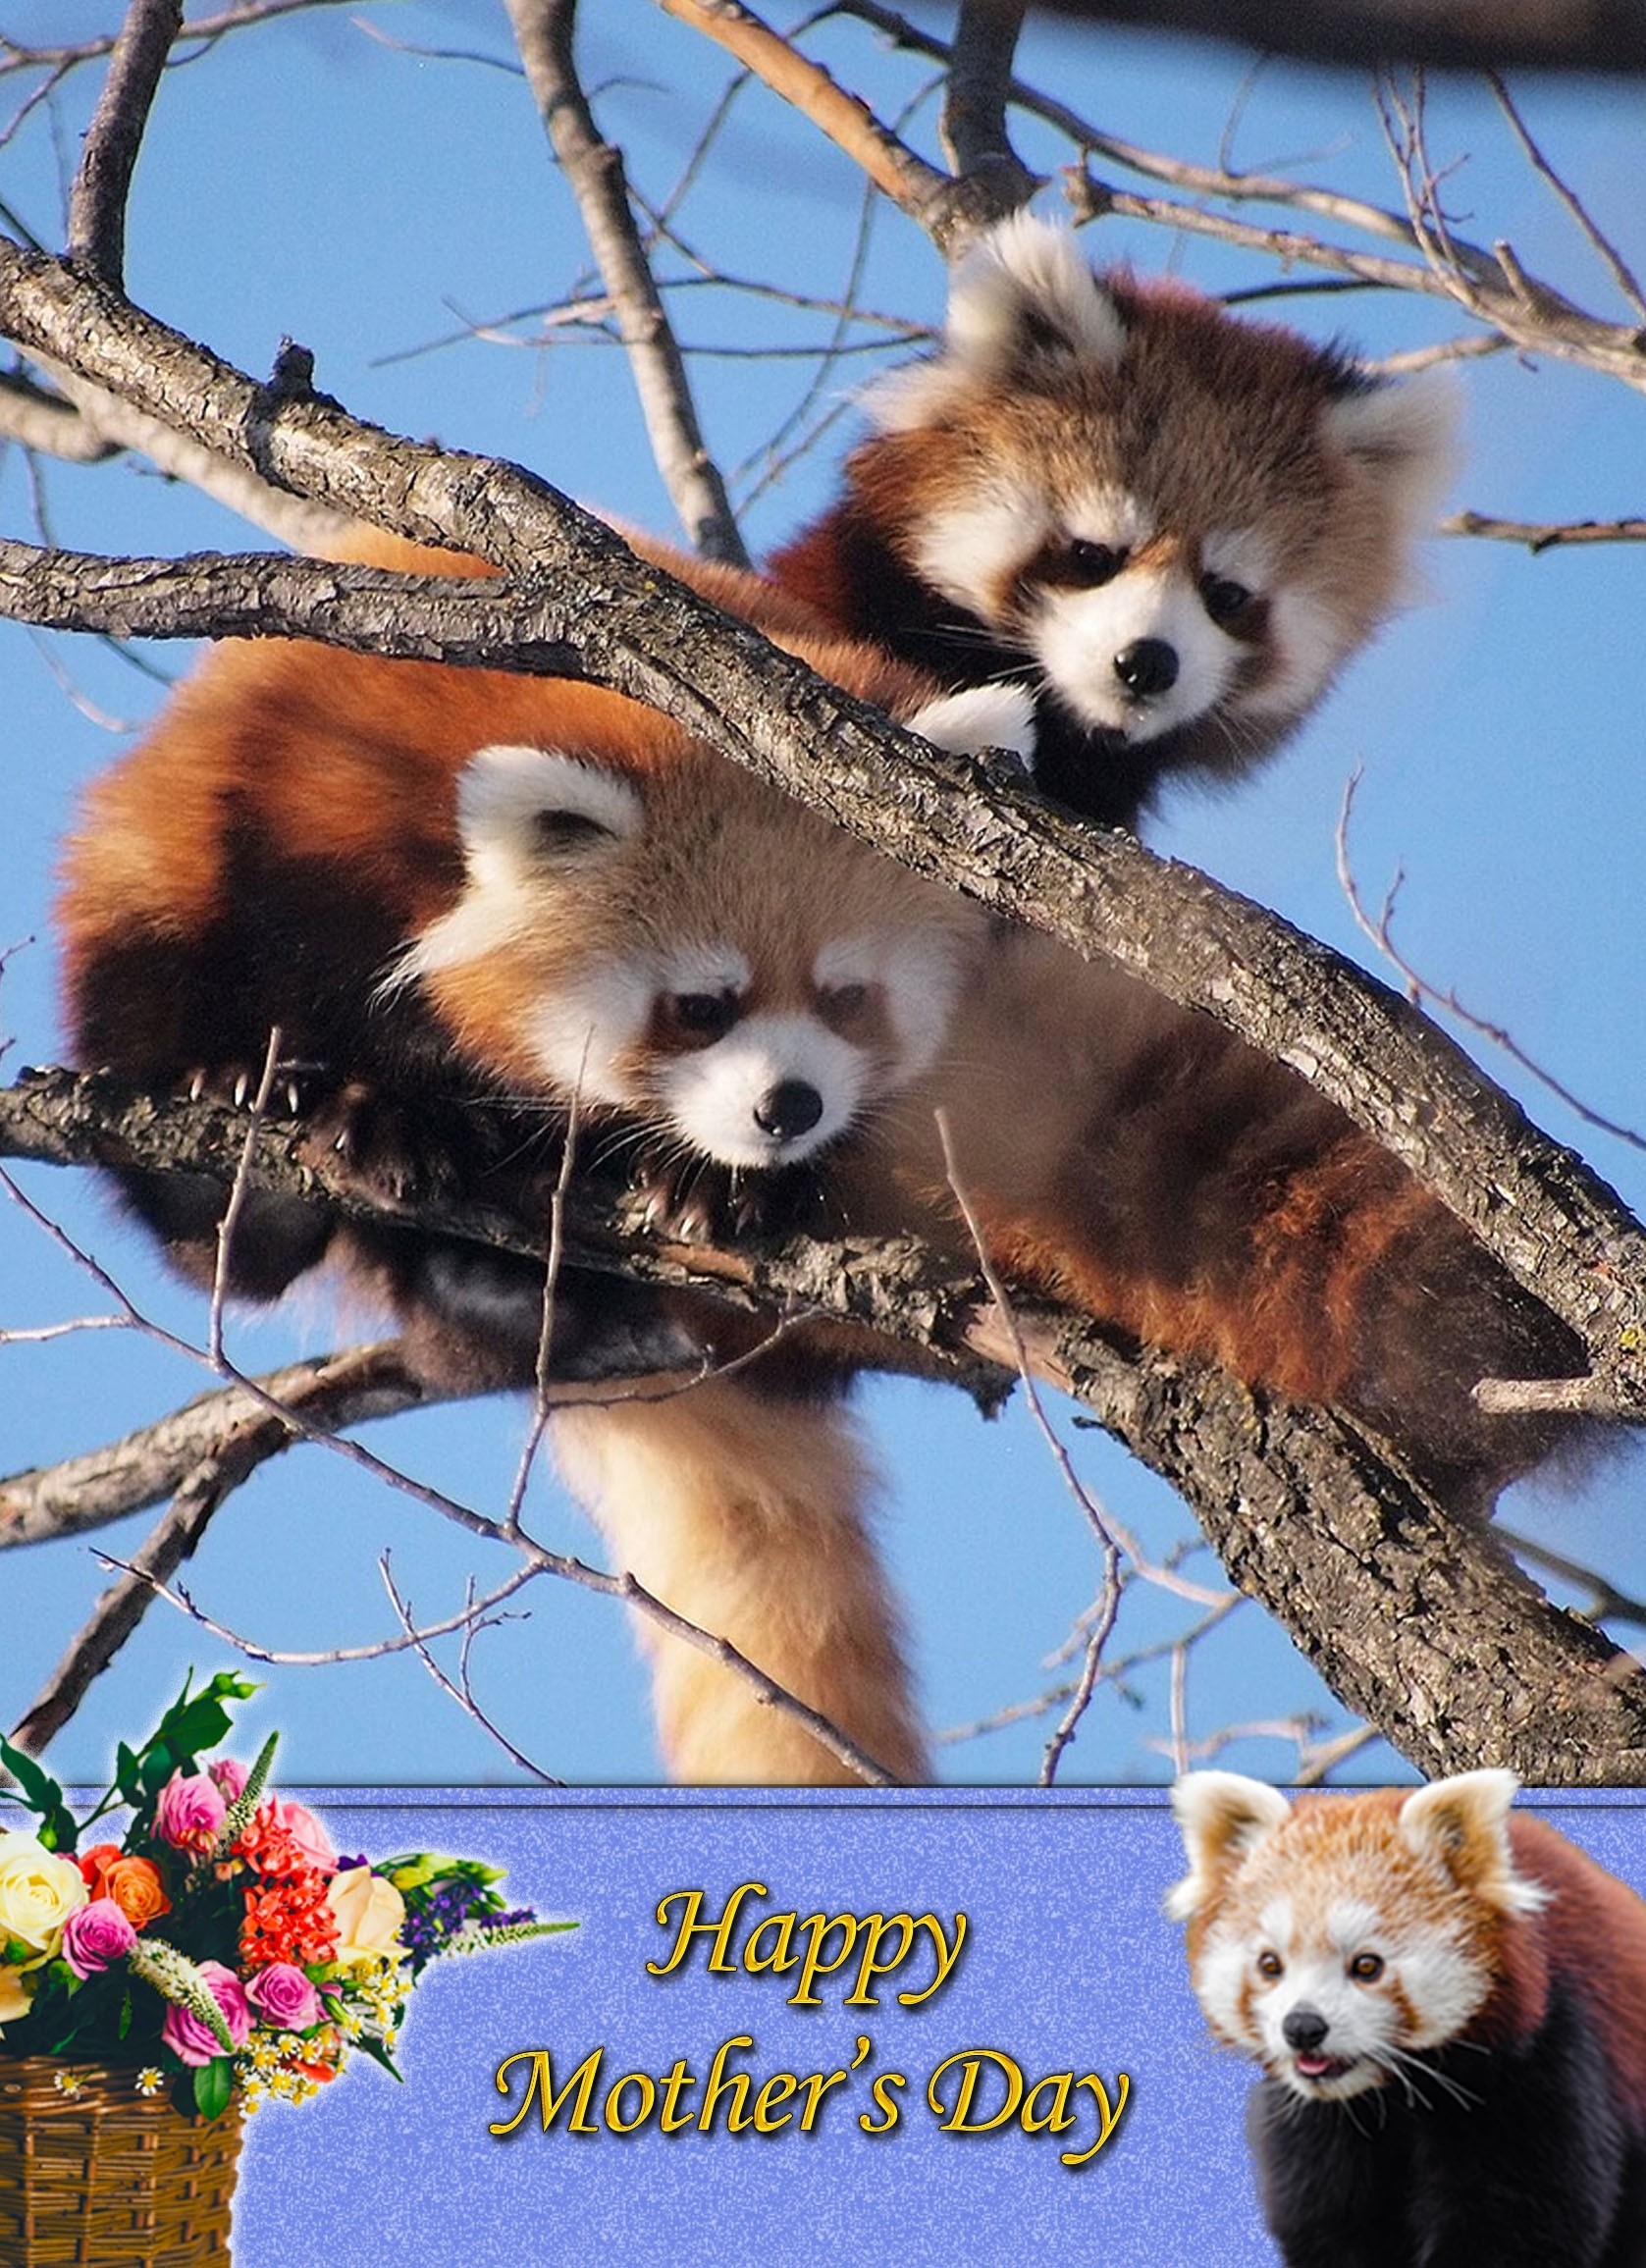 Red Panda Mother's Day Card